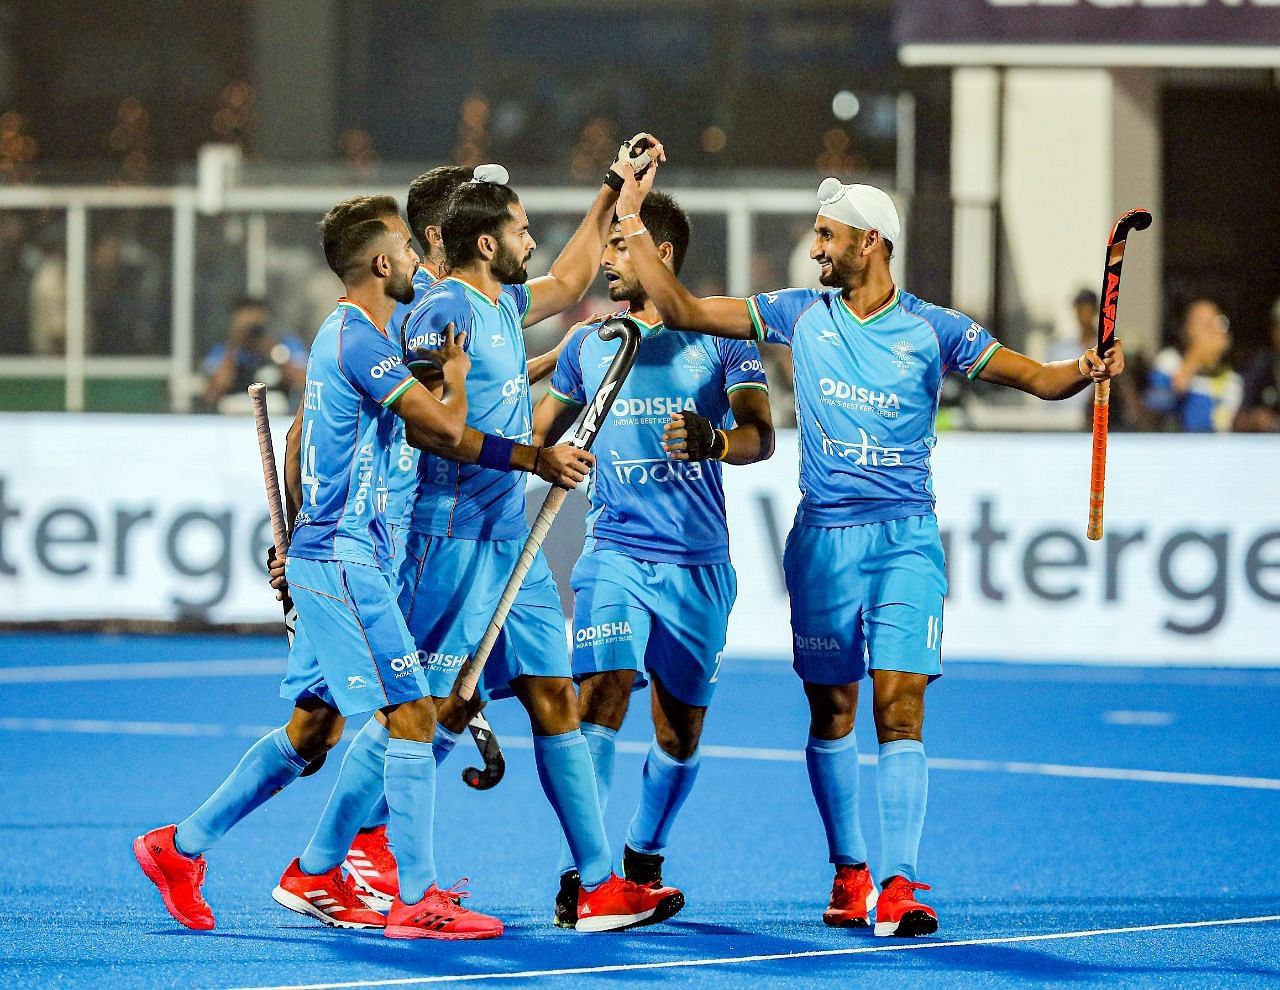 Indian team celebrating their win against Wales team (Image Courtesy: Twitter/Hockey India)